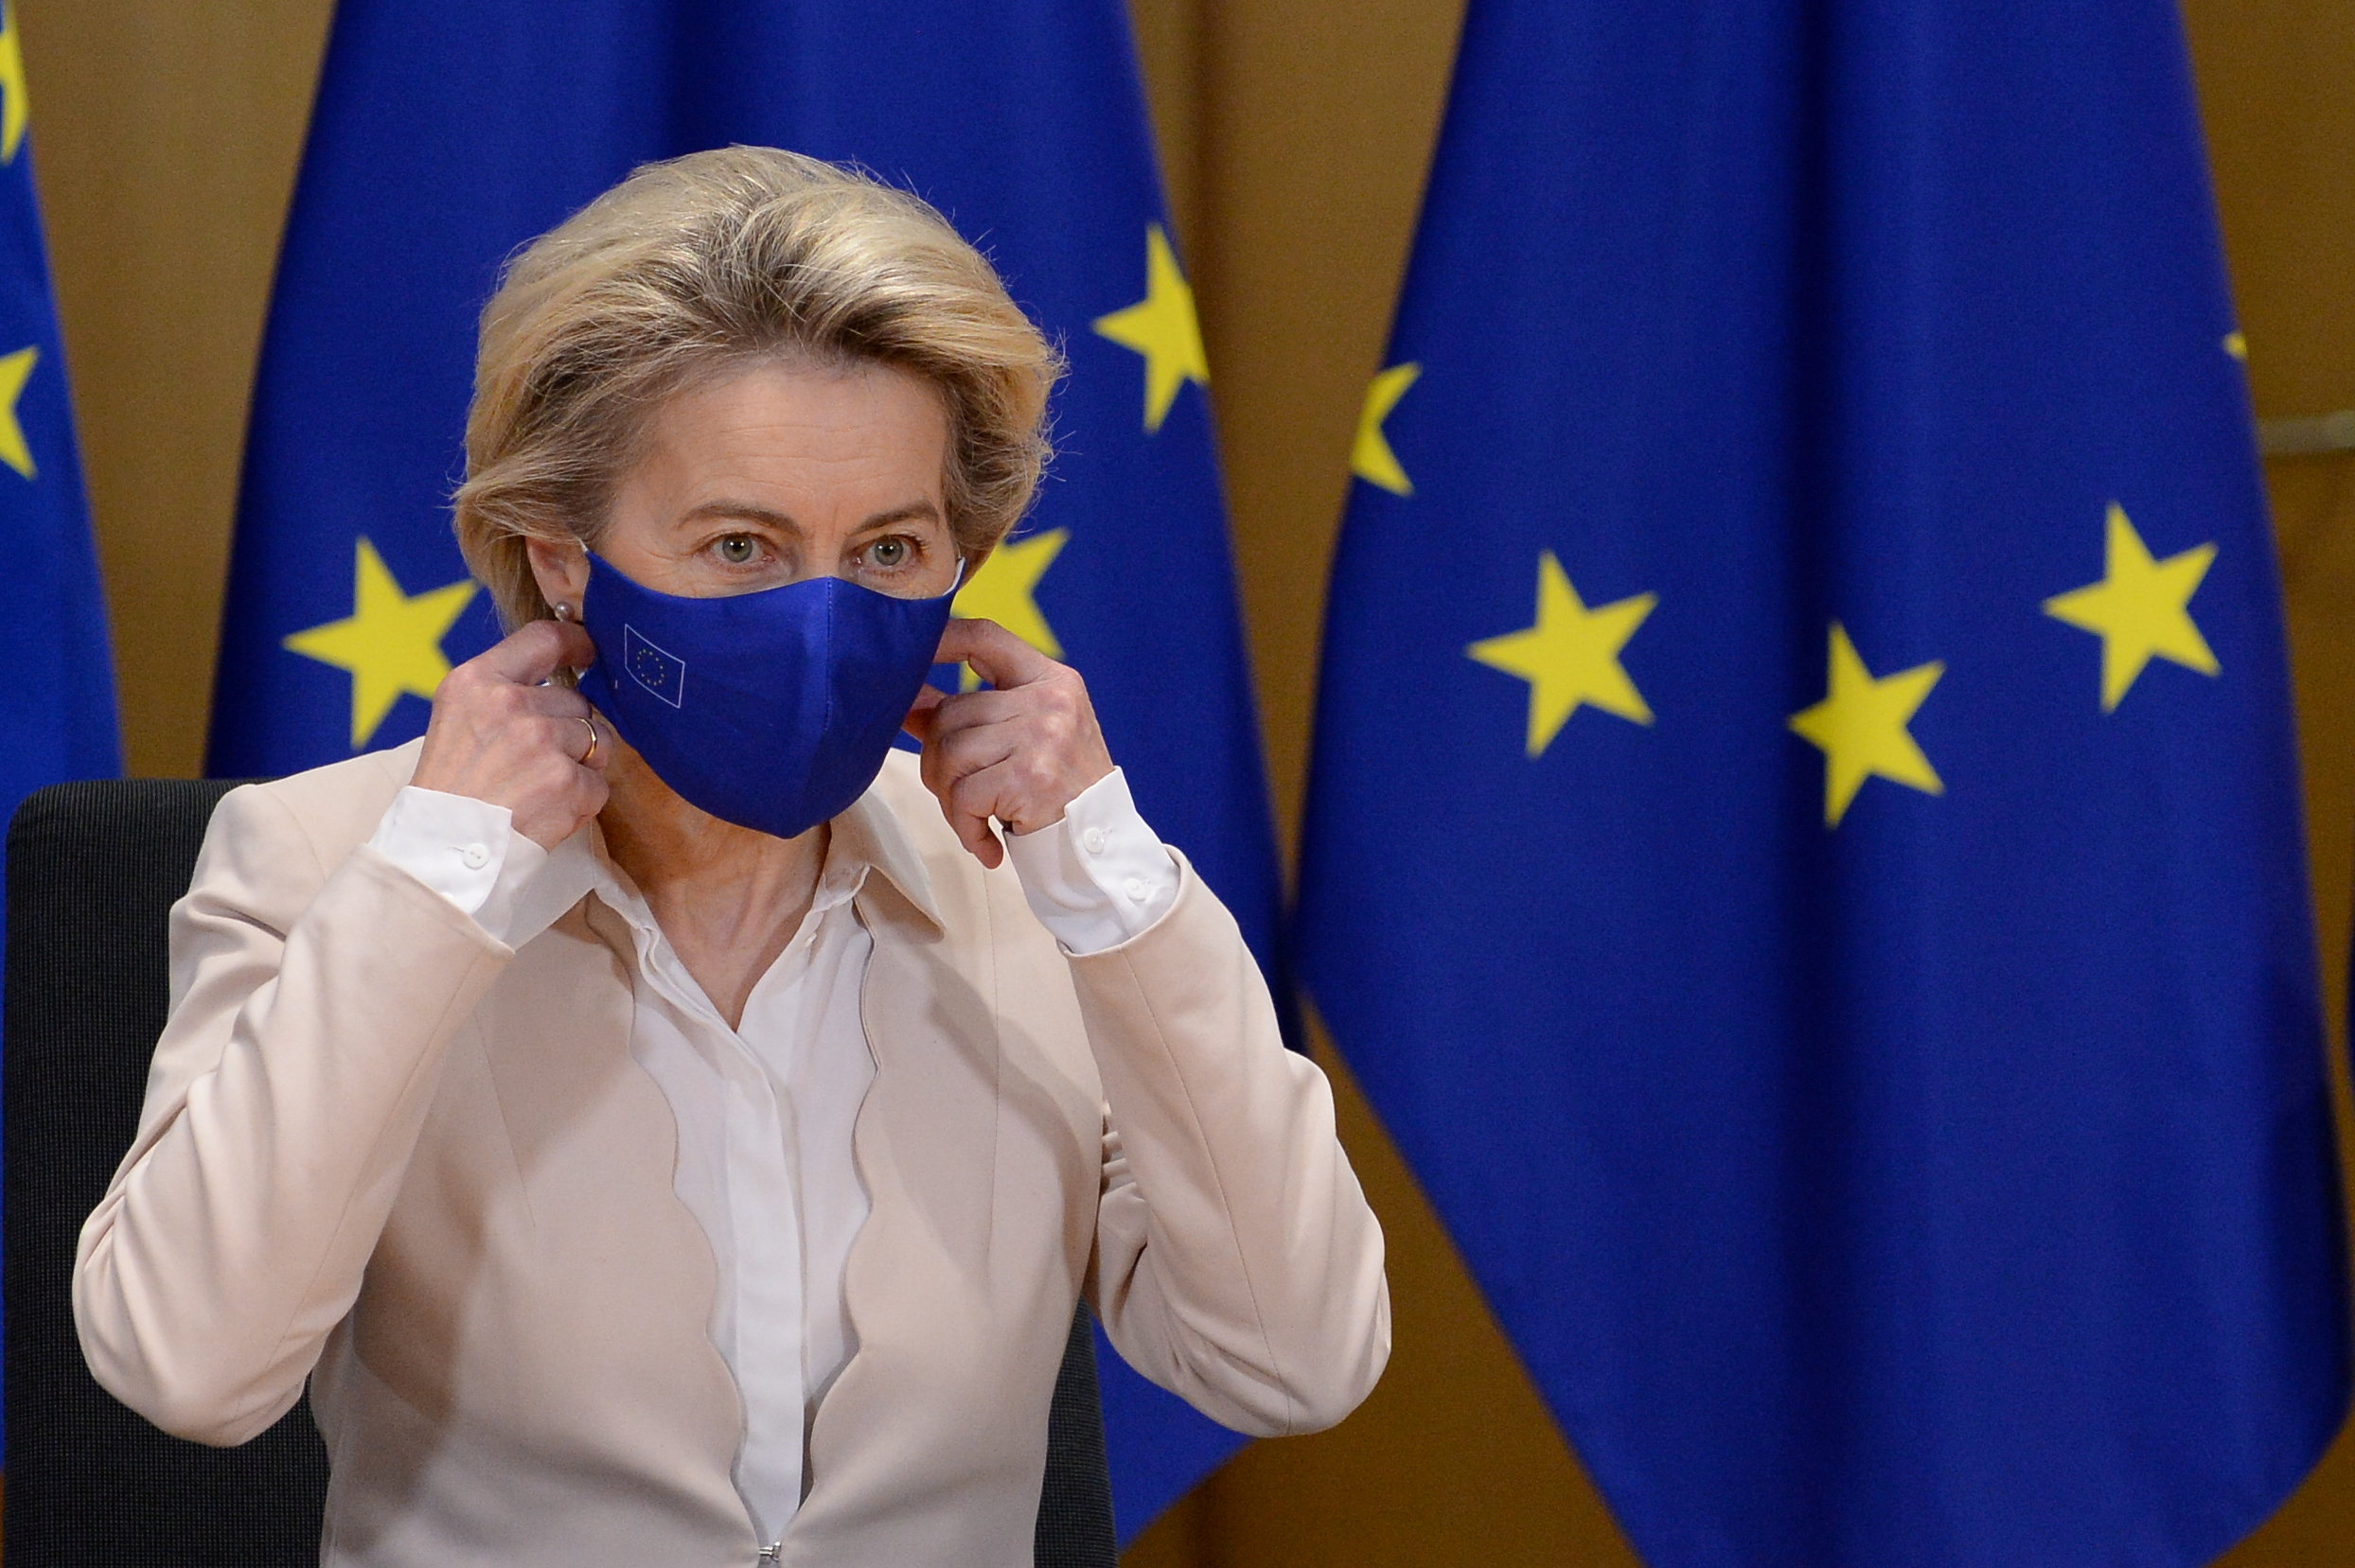 European Commission President Ursula von der Leyen takes off her mask before signing Brexit trade agreement due to come into force on January 1, 2021, in Brussels, Belgium December 30, 2020. REUTERS/Johanna Geron/Pool